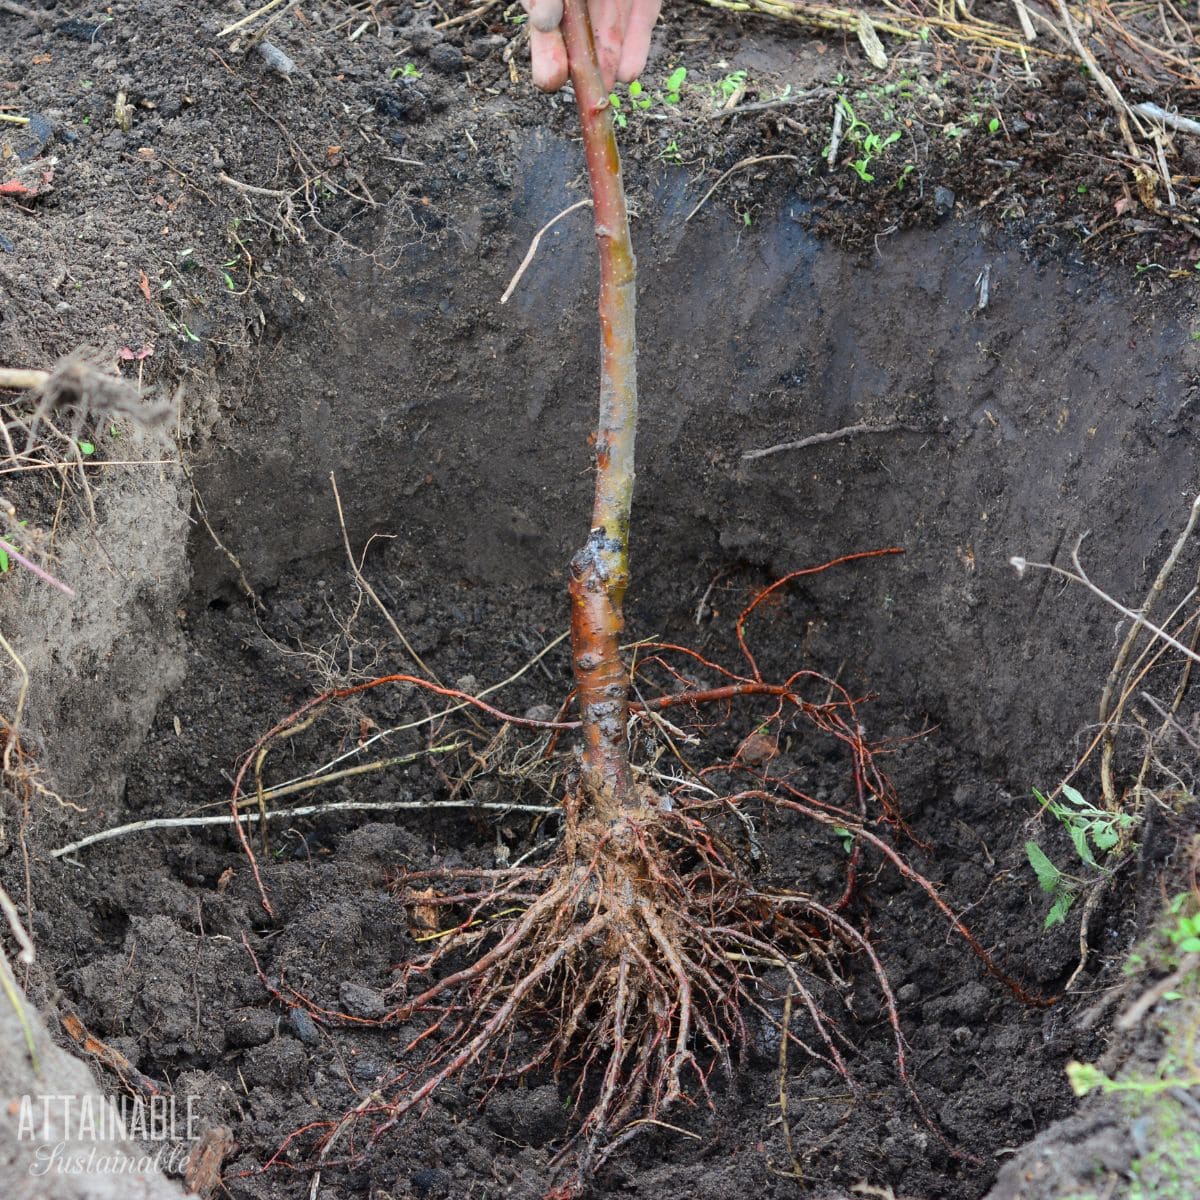 Bare root tree being placed in a planting hole.